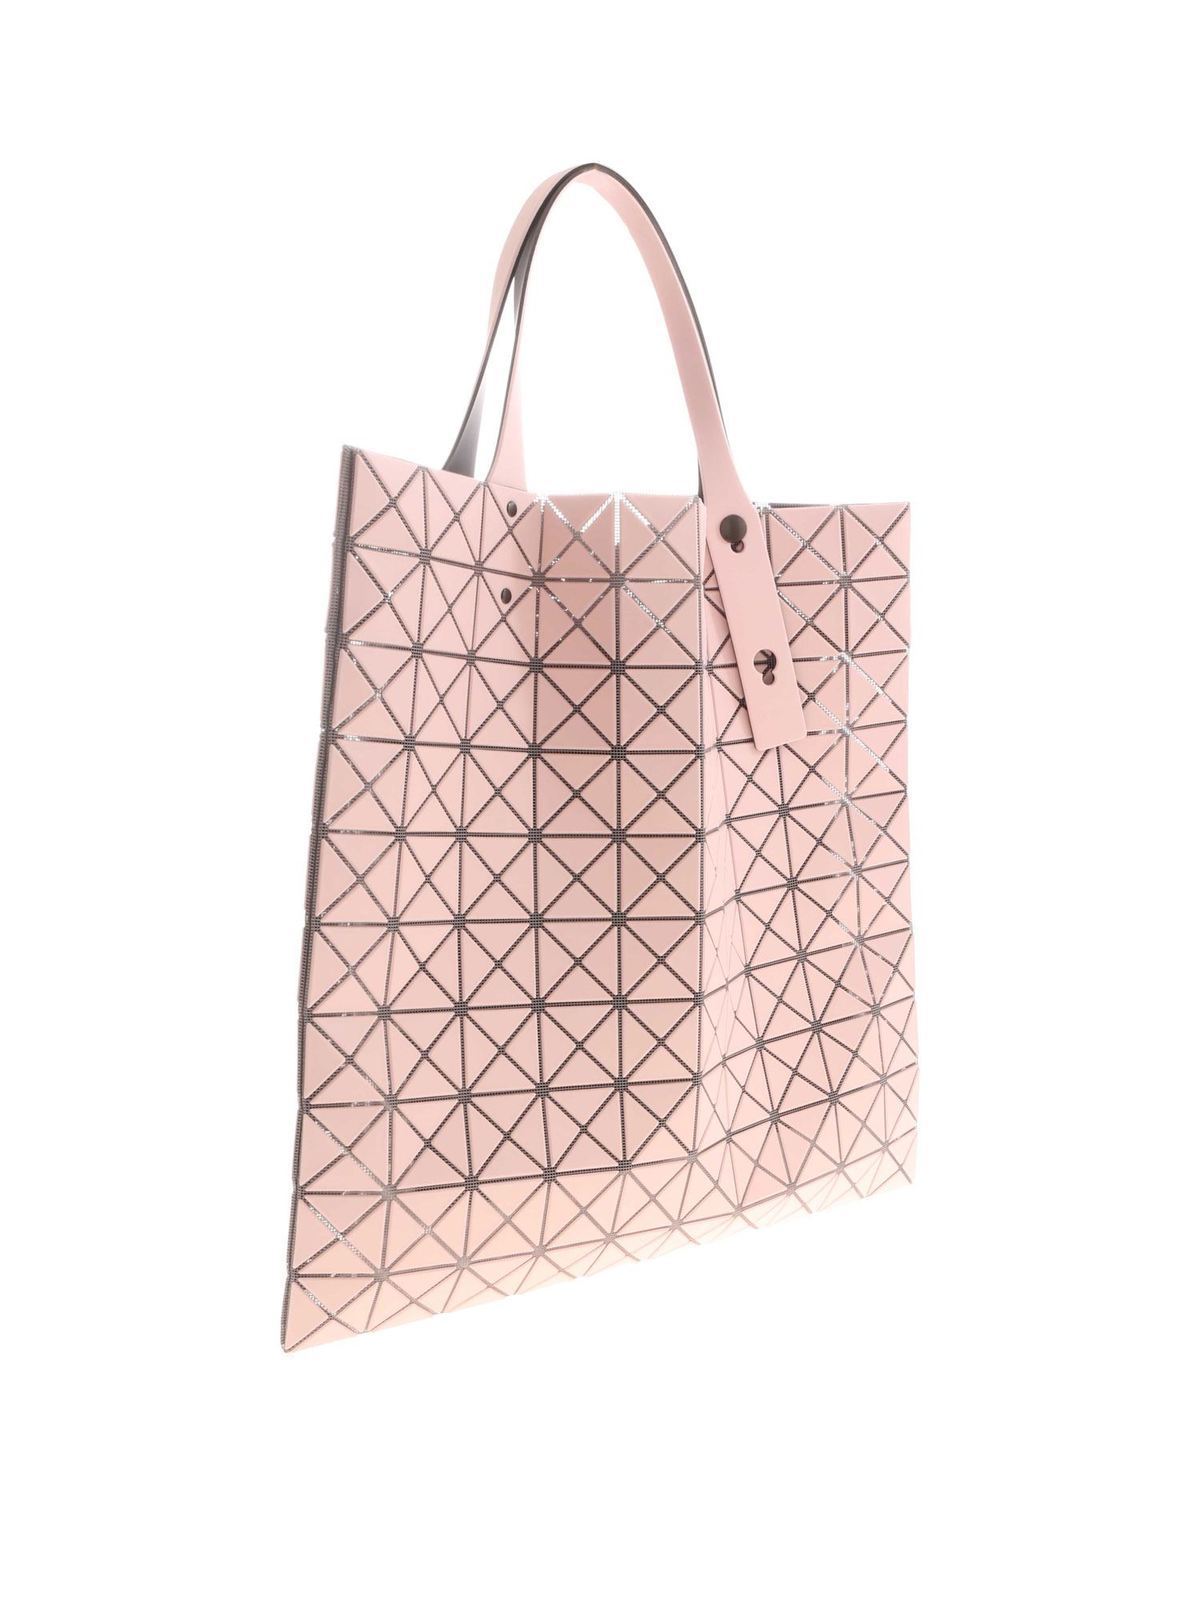 Totes bags Bao Bao Issey Miyake - Prism Frost tote in pink - BB06AG50321